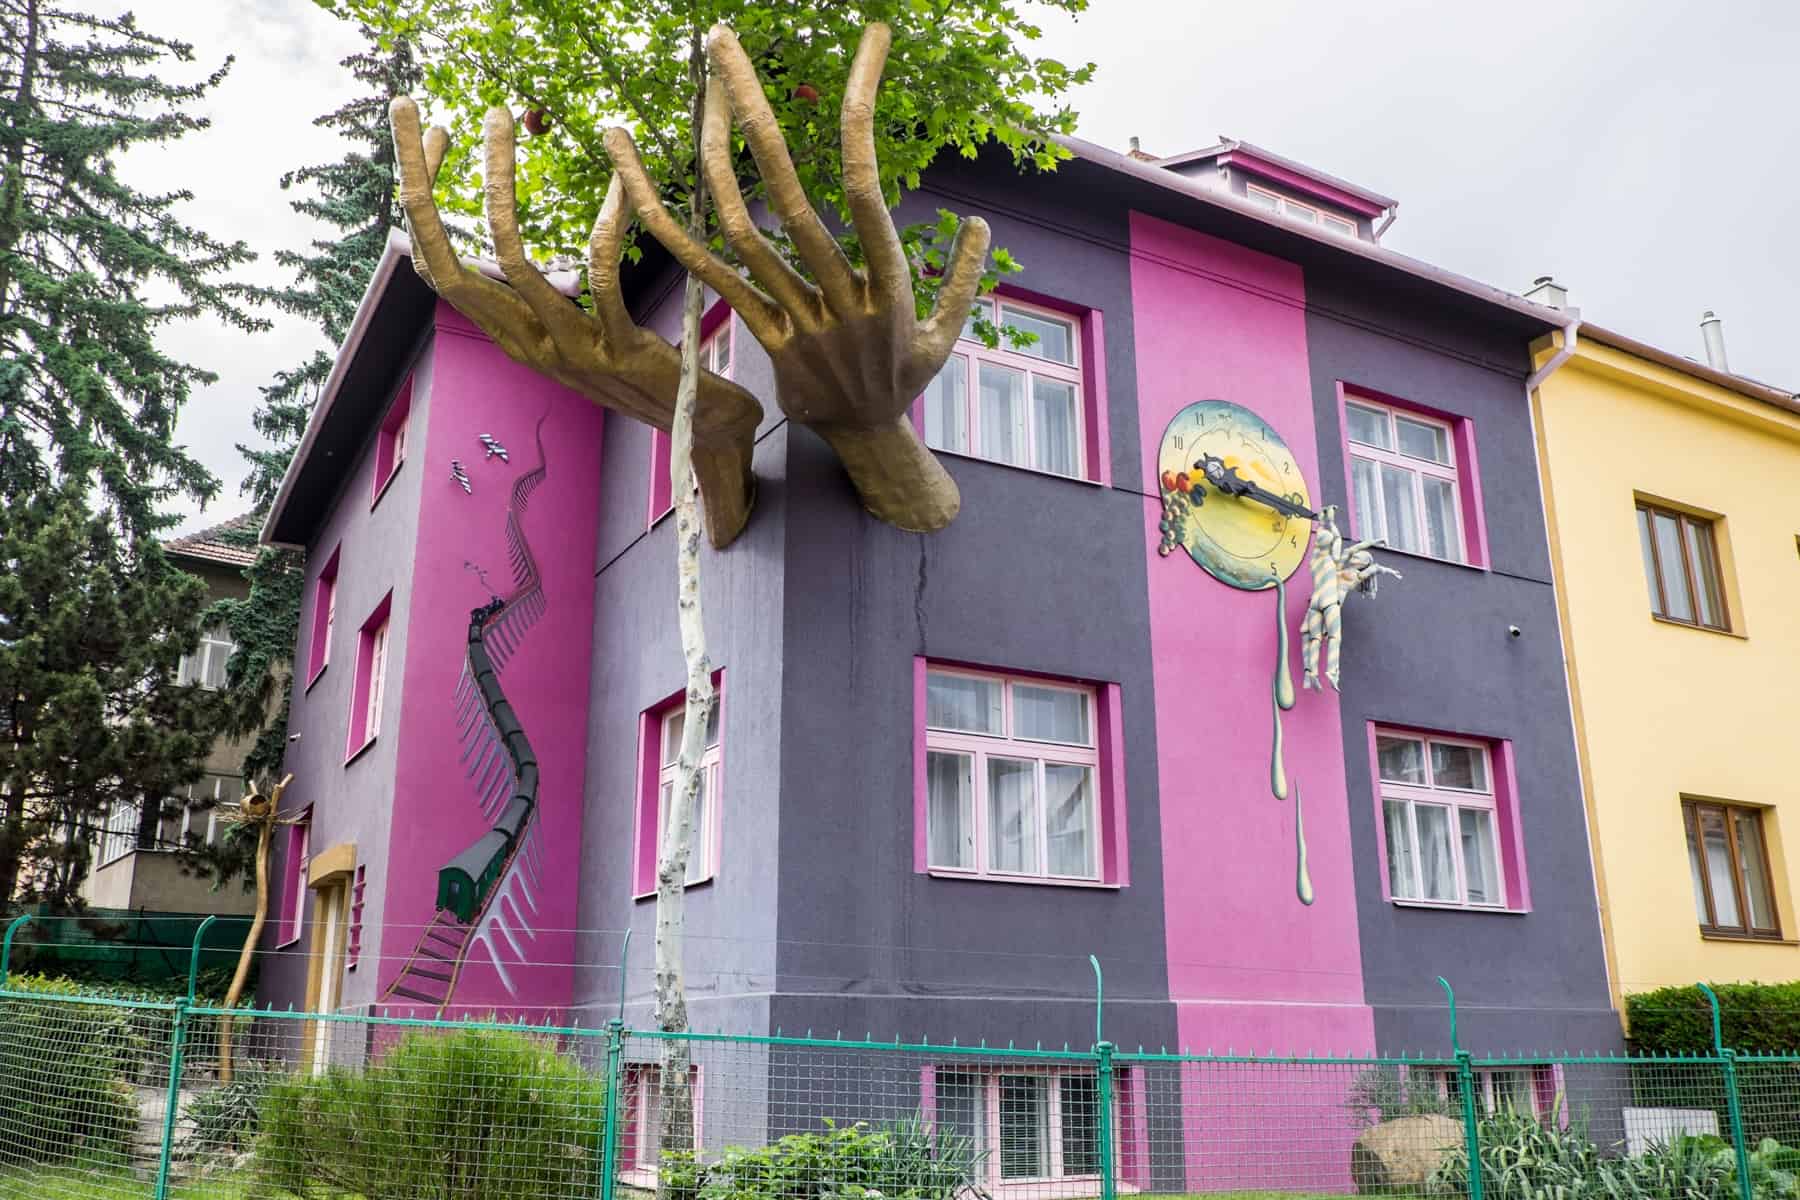 A purple and pink stripped building with a giant pair of golden hands protruding from it. A tree grows in between the hands and a figure can be seen hanging from a clock on the front wall. 